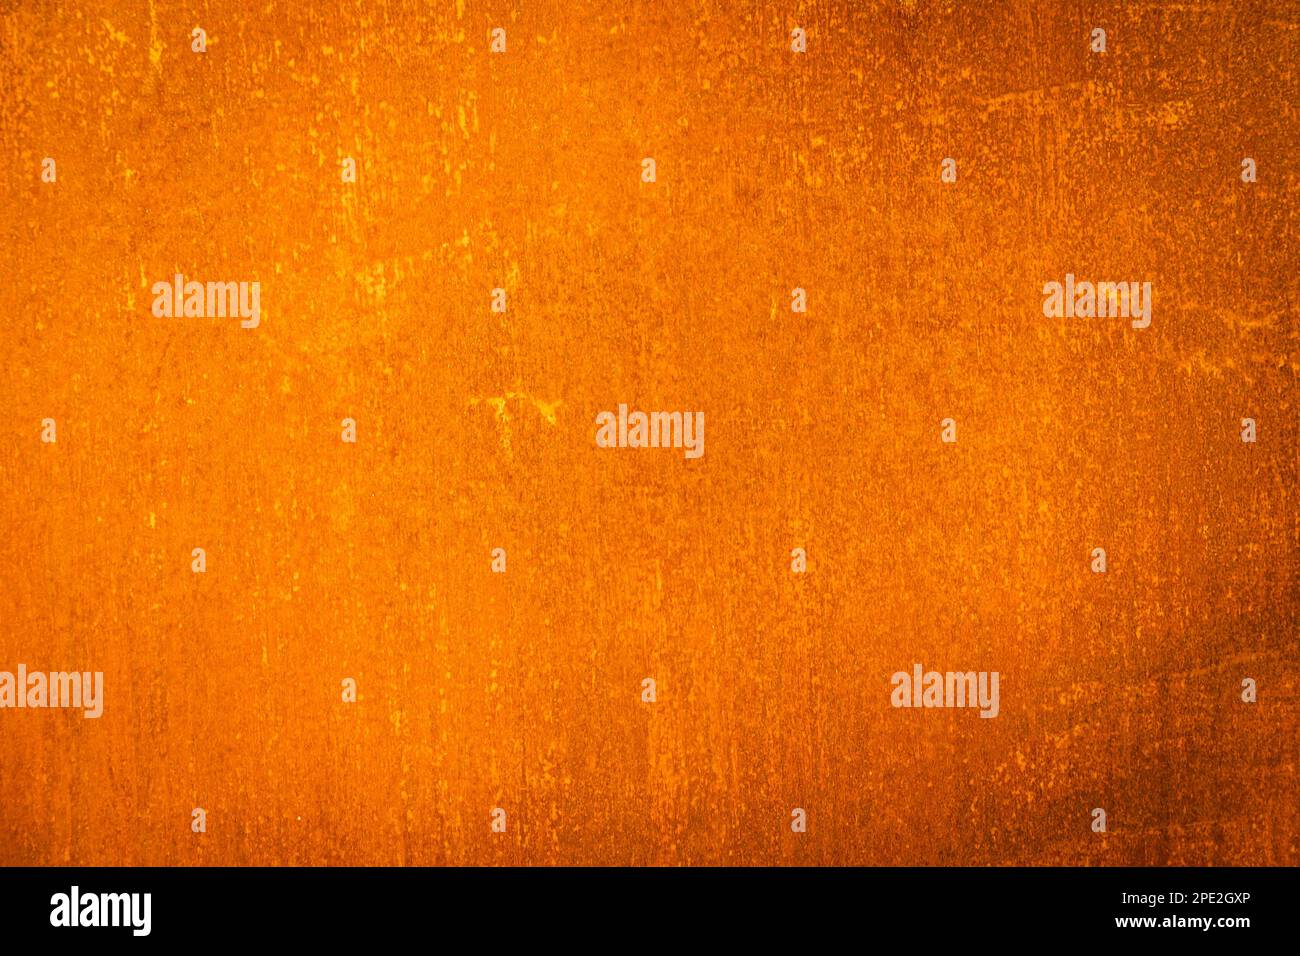 Iron rusty background surface with texture in direct sunlight. Stock Photo